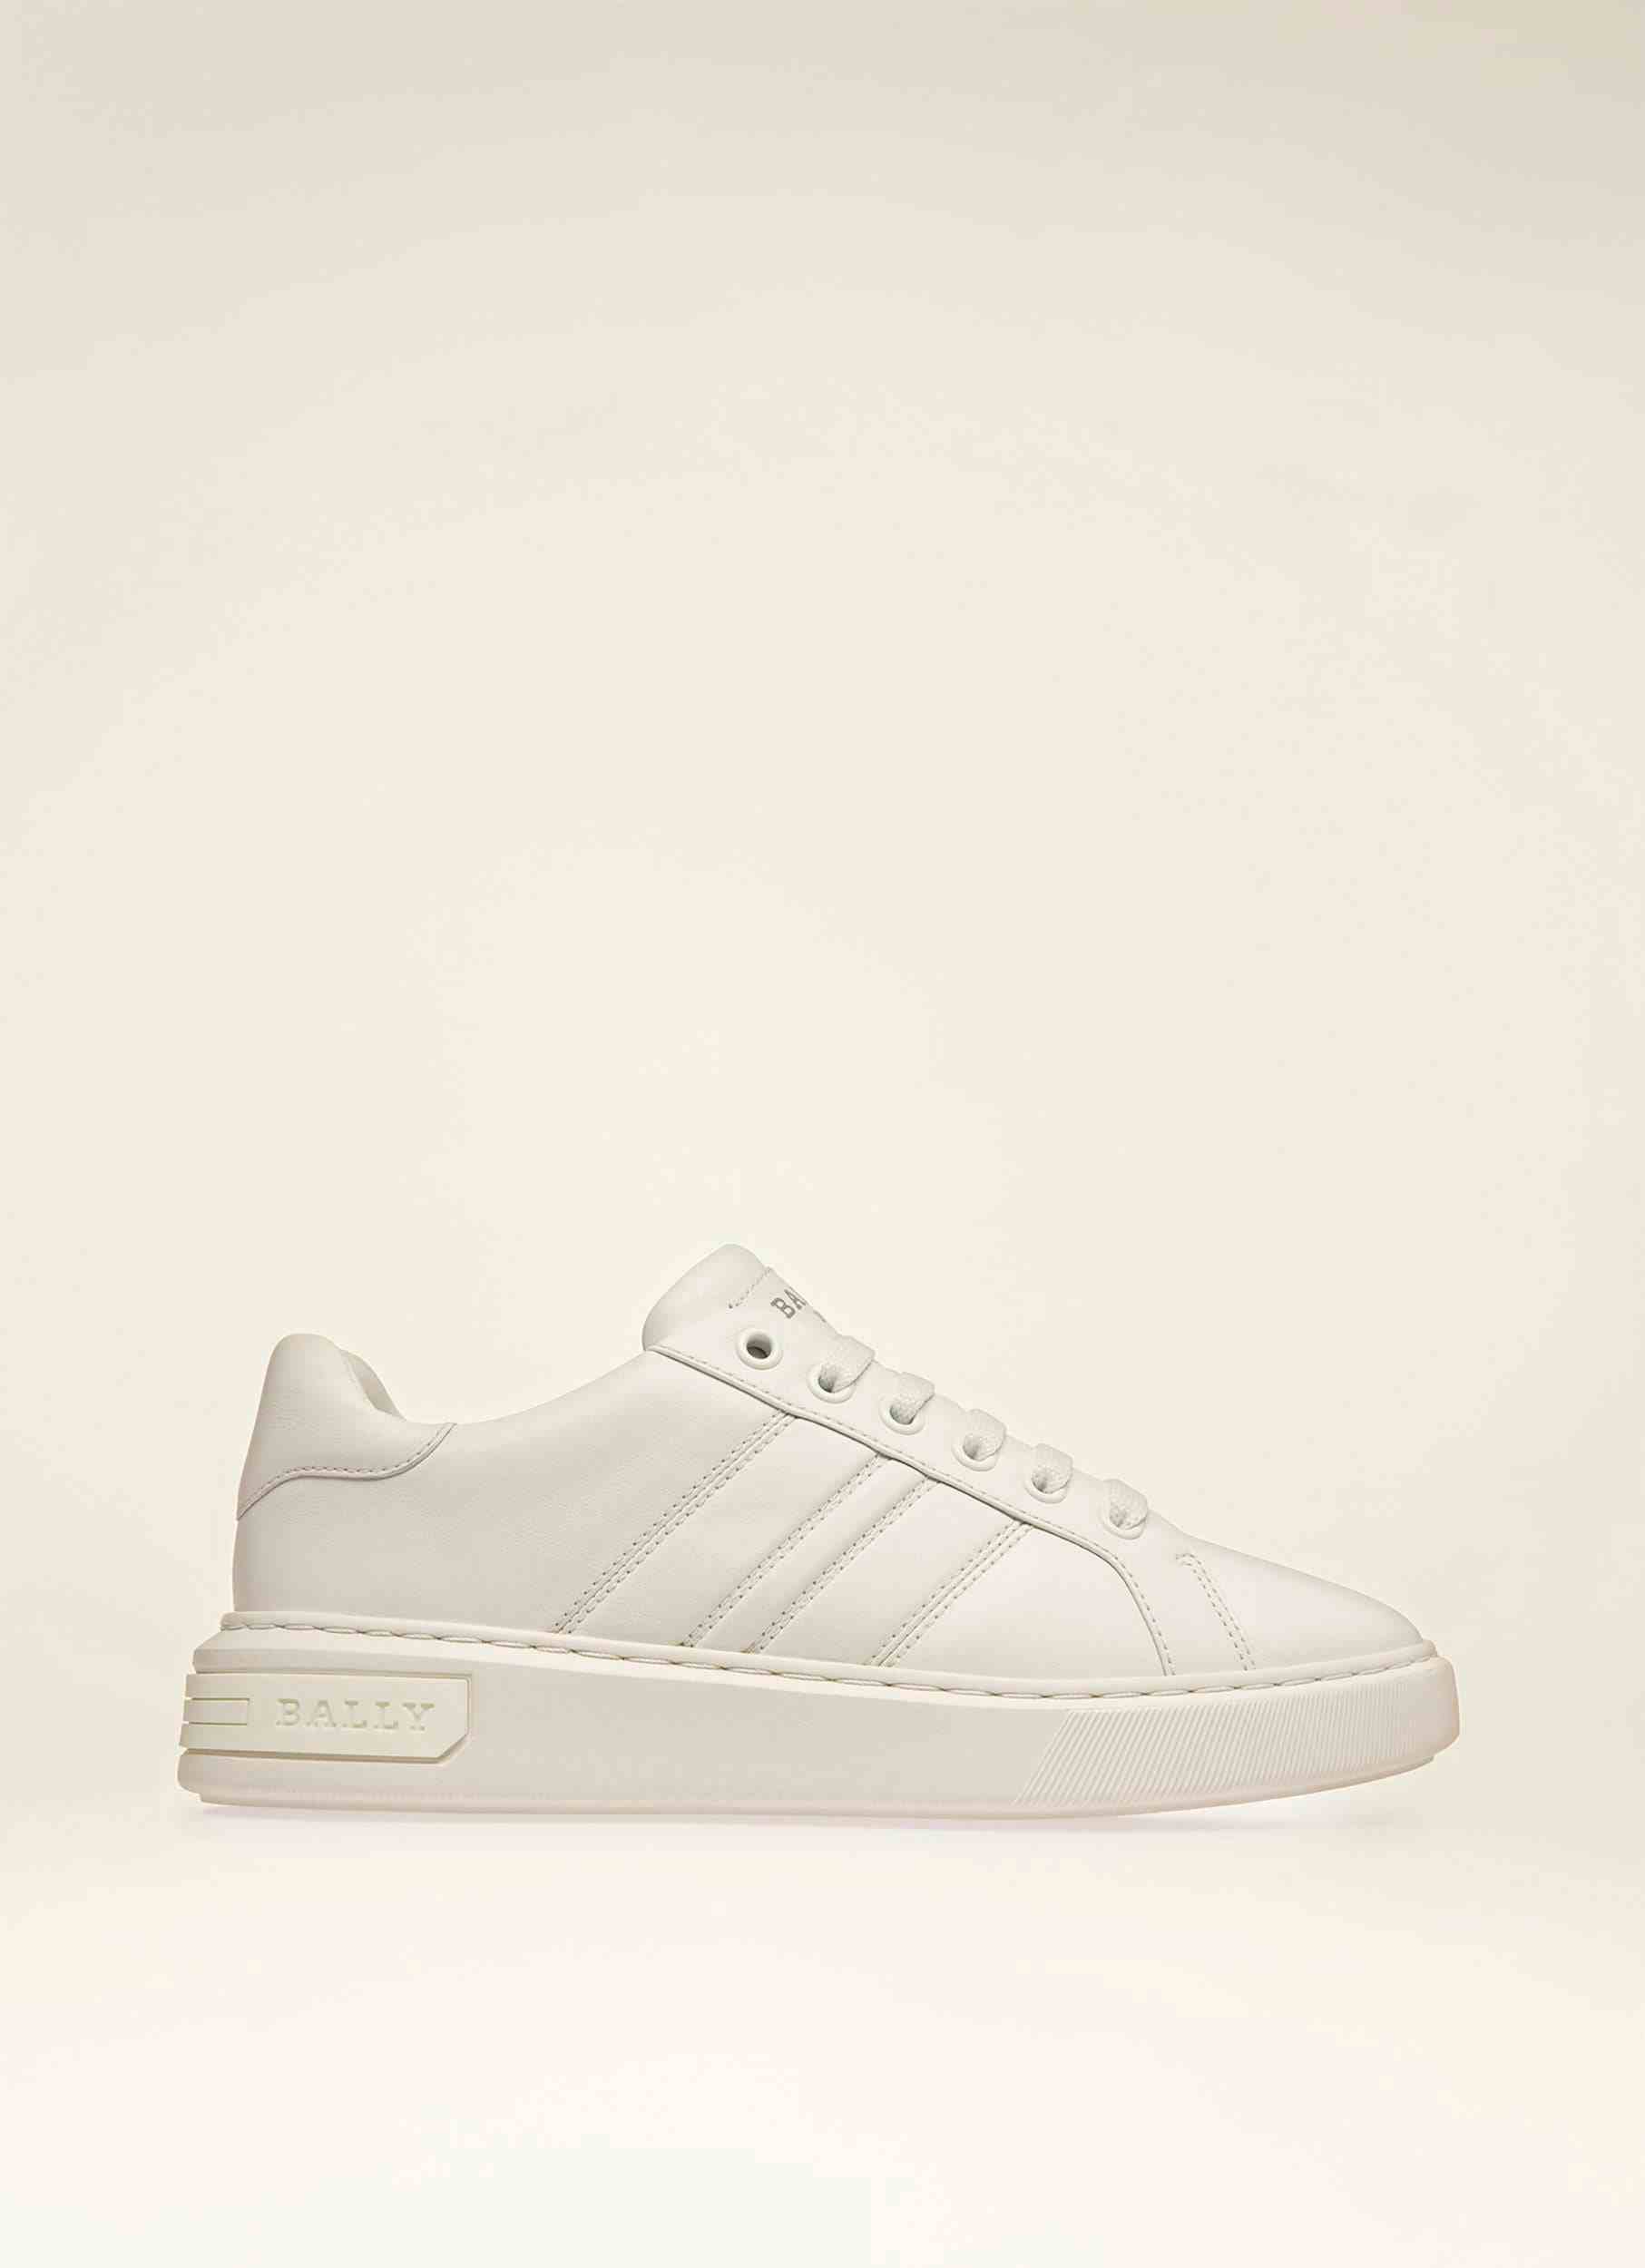 BALLY LIFT Leather Sneakers In White - Women's - Bally